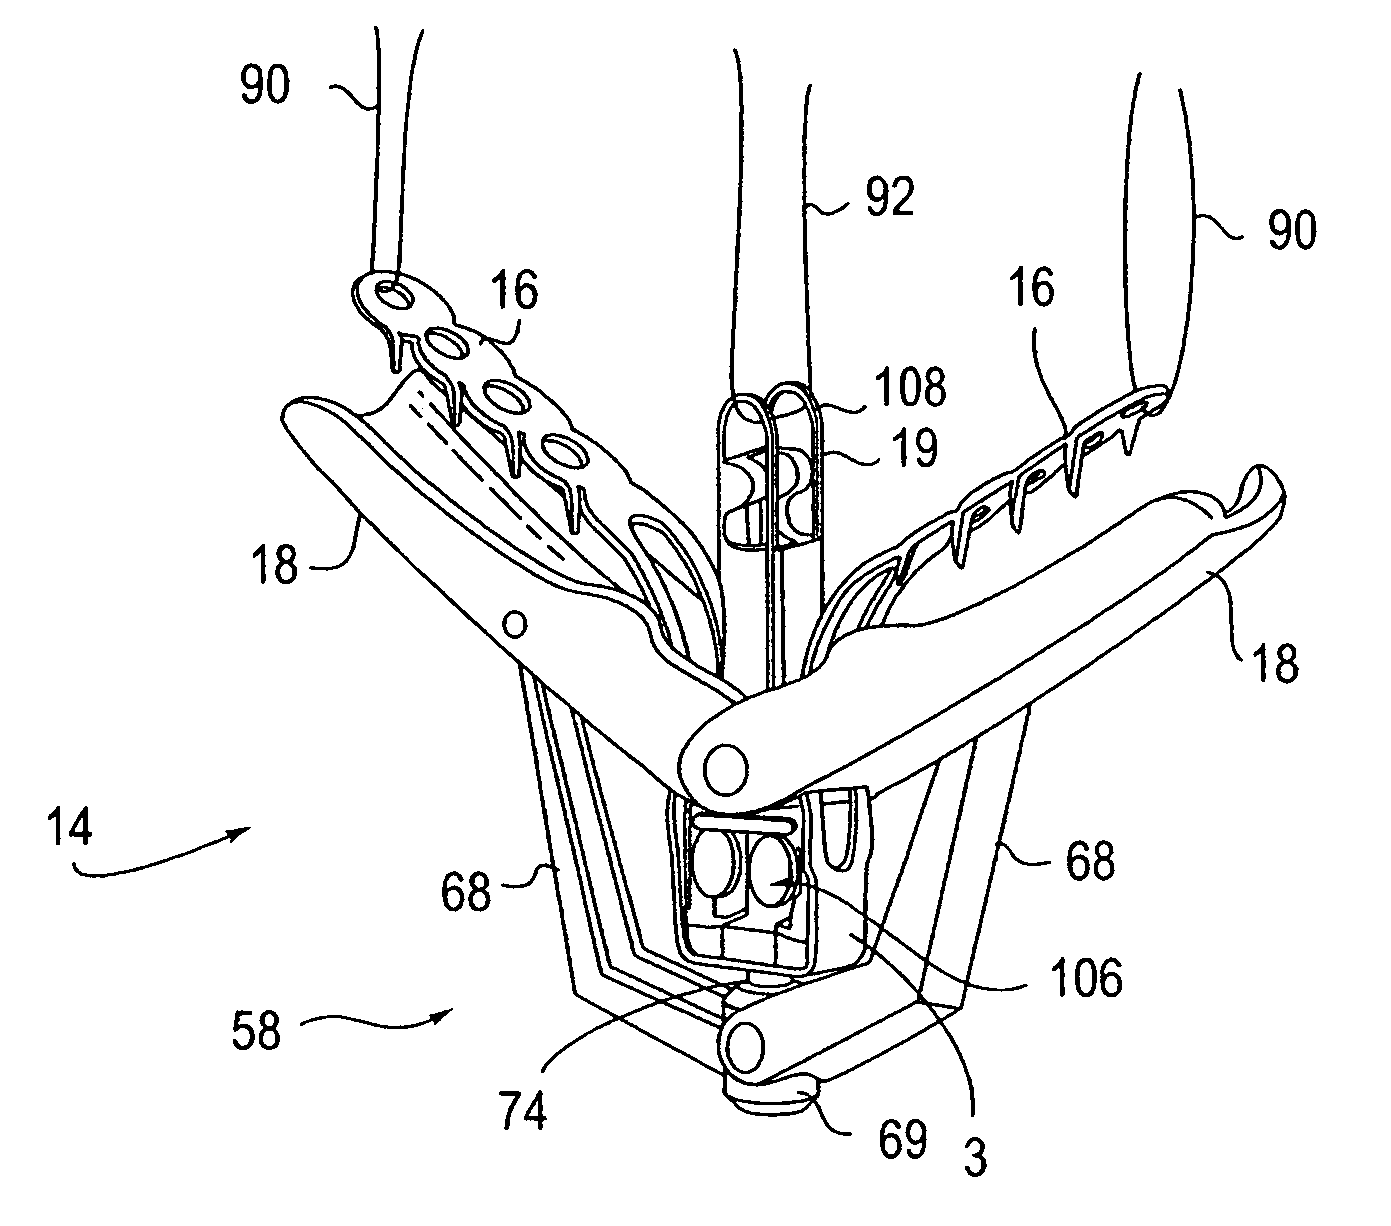 Locking mechanisms for fixation devices and methods of engaging tissue